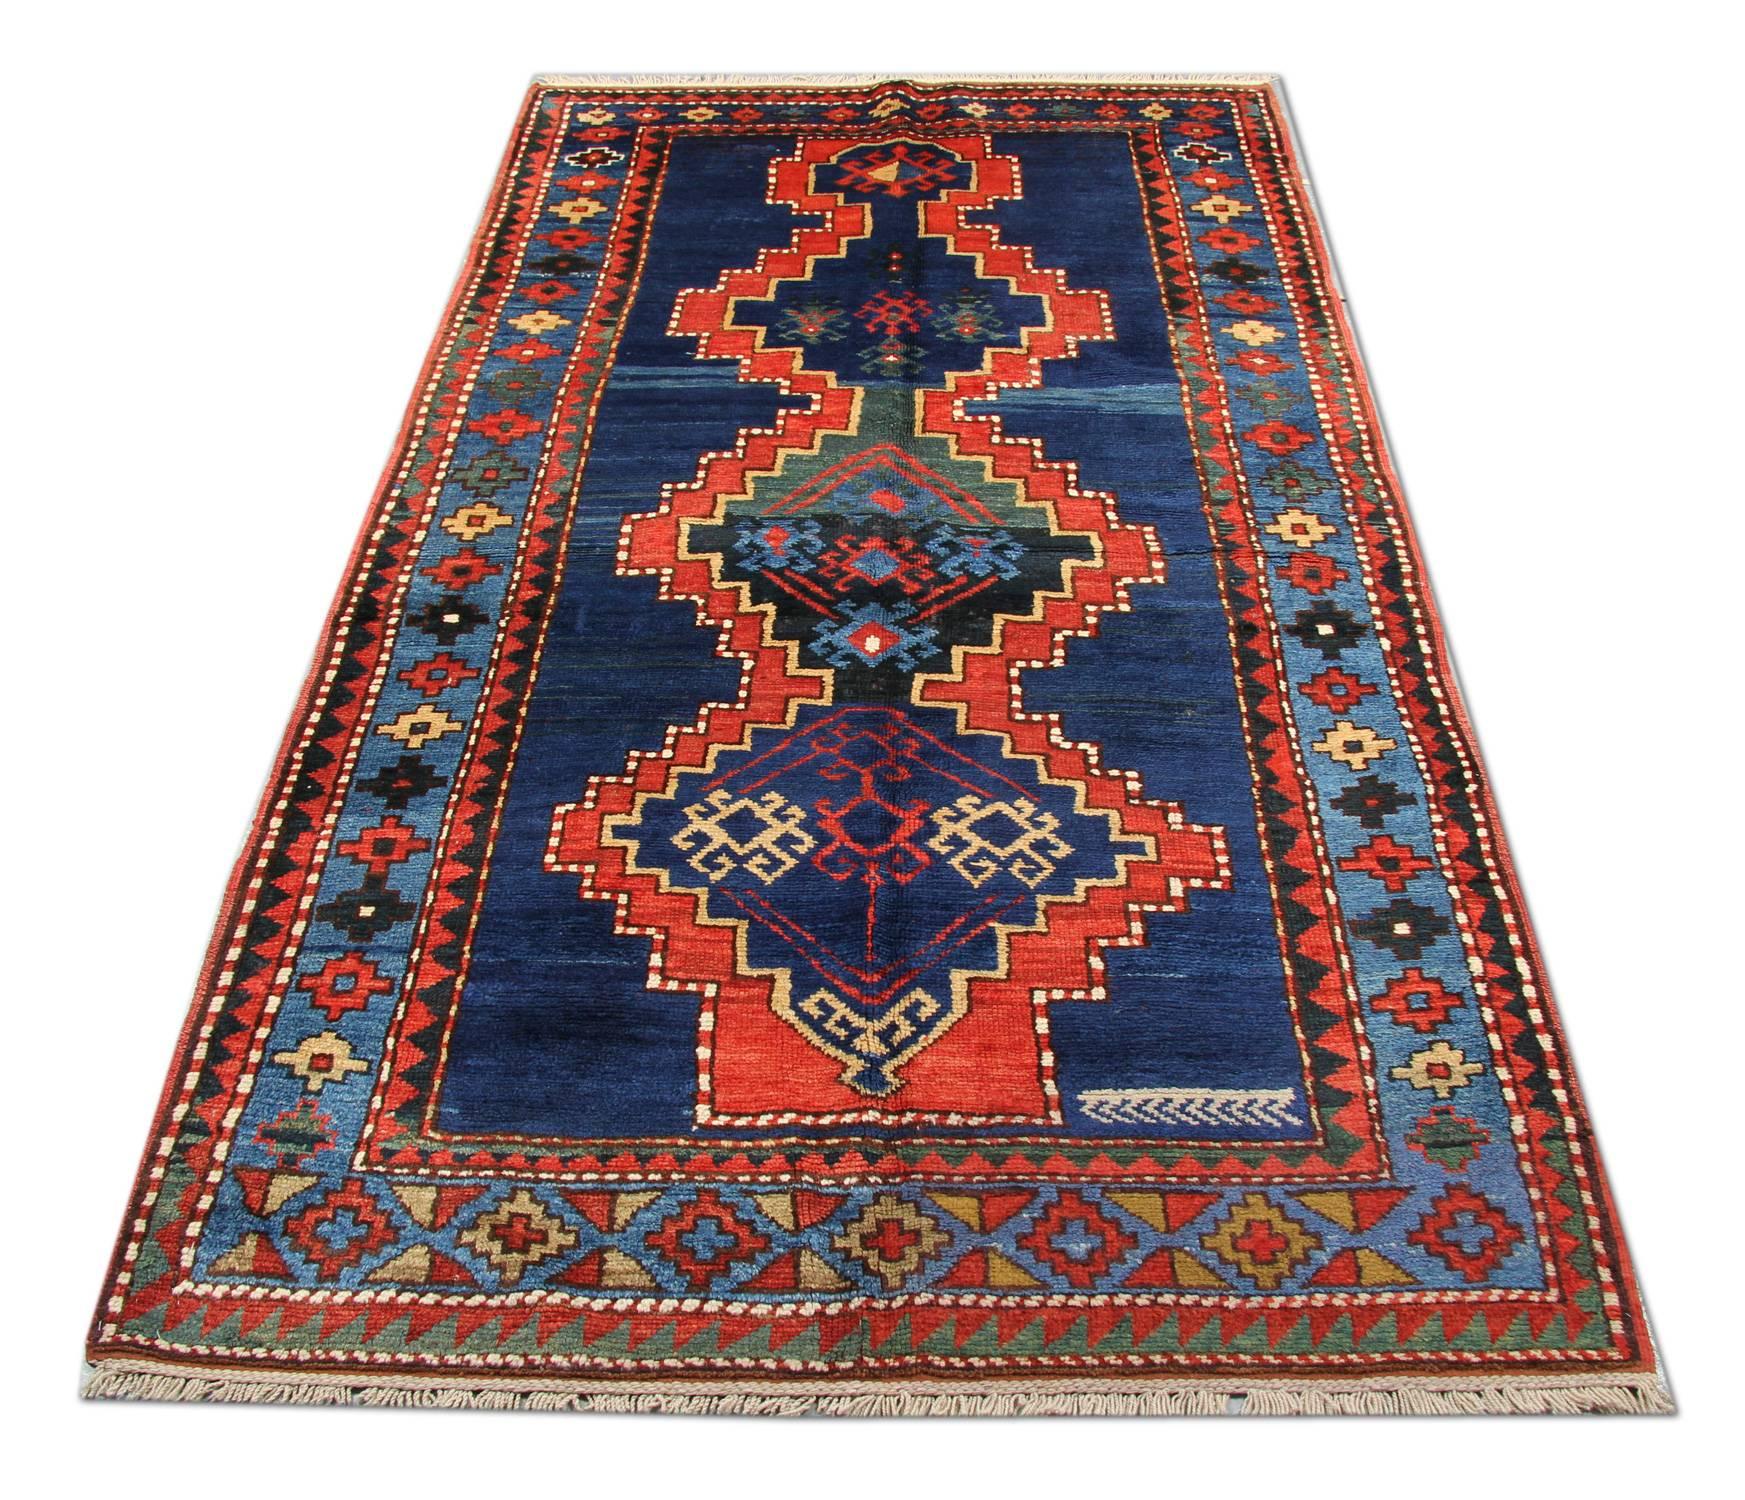 Hand-Knotted Blue Kazak Rugs Geometric Caucasian Carpet Area Living Room Rugs Antique For Sale